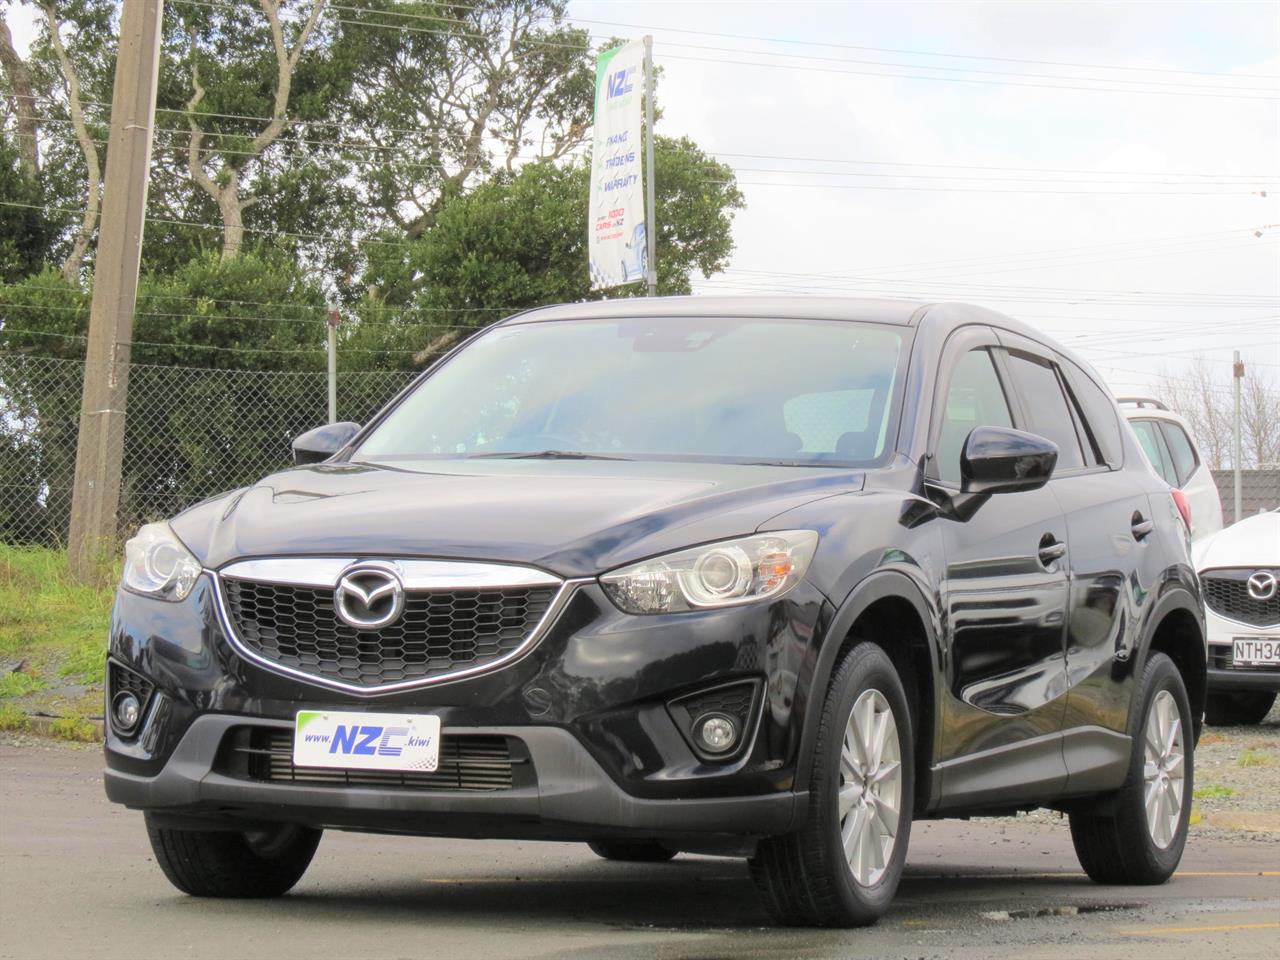 2012 Mazda CX-5 only $54 weekly